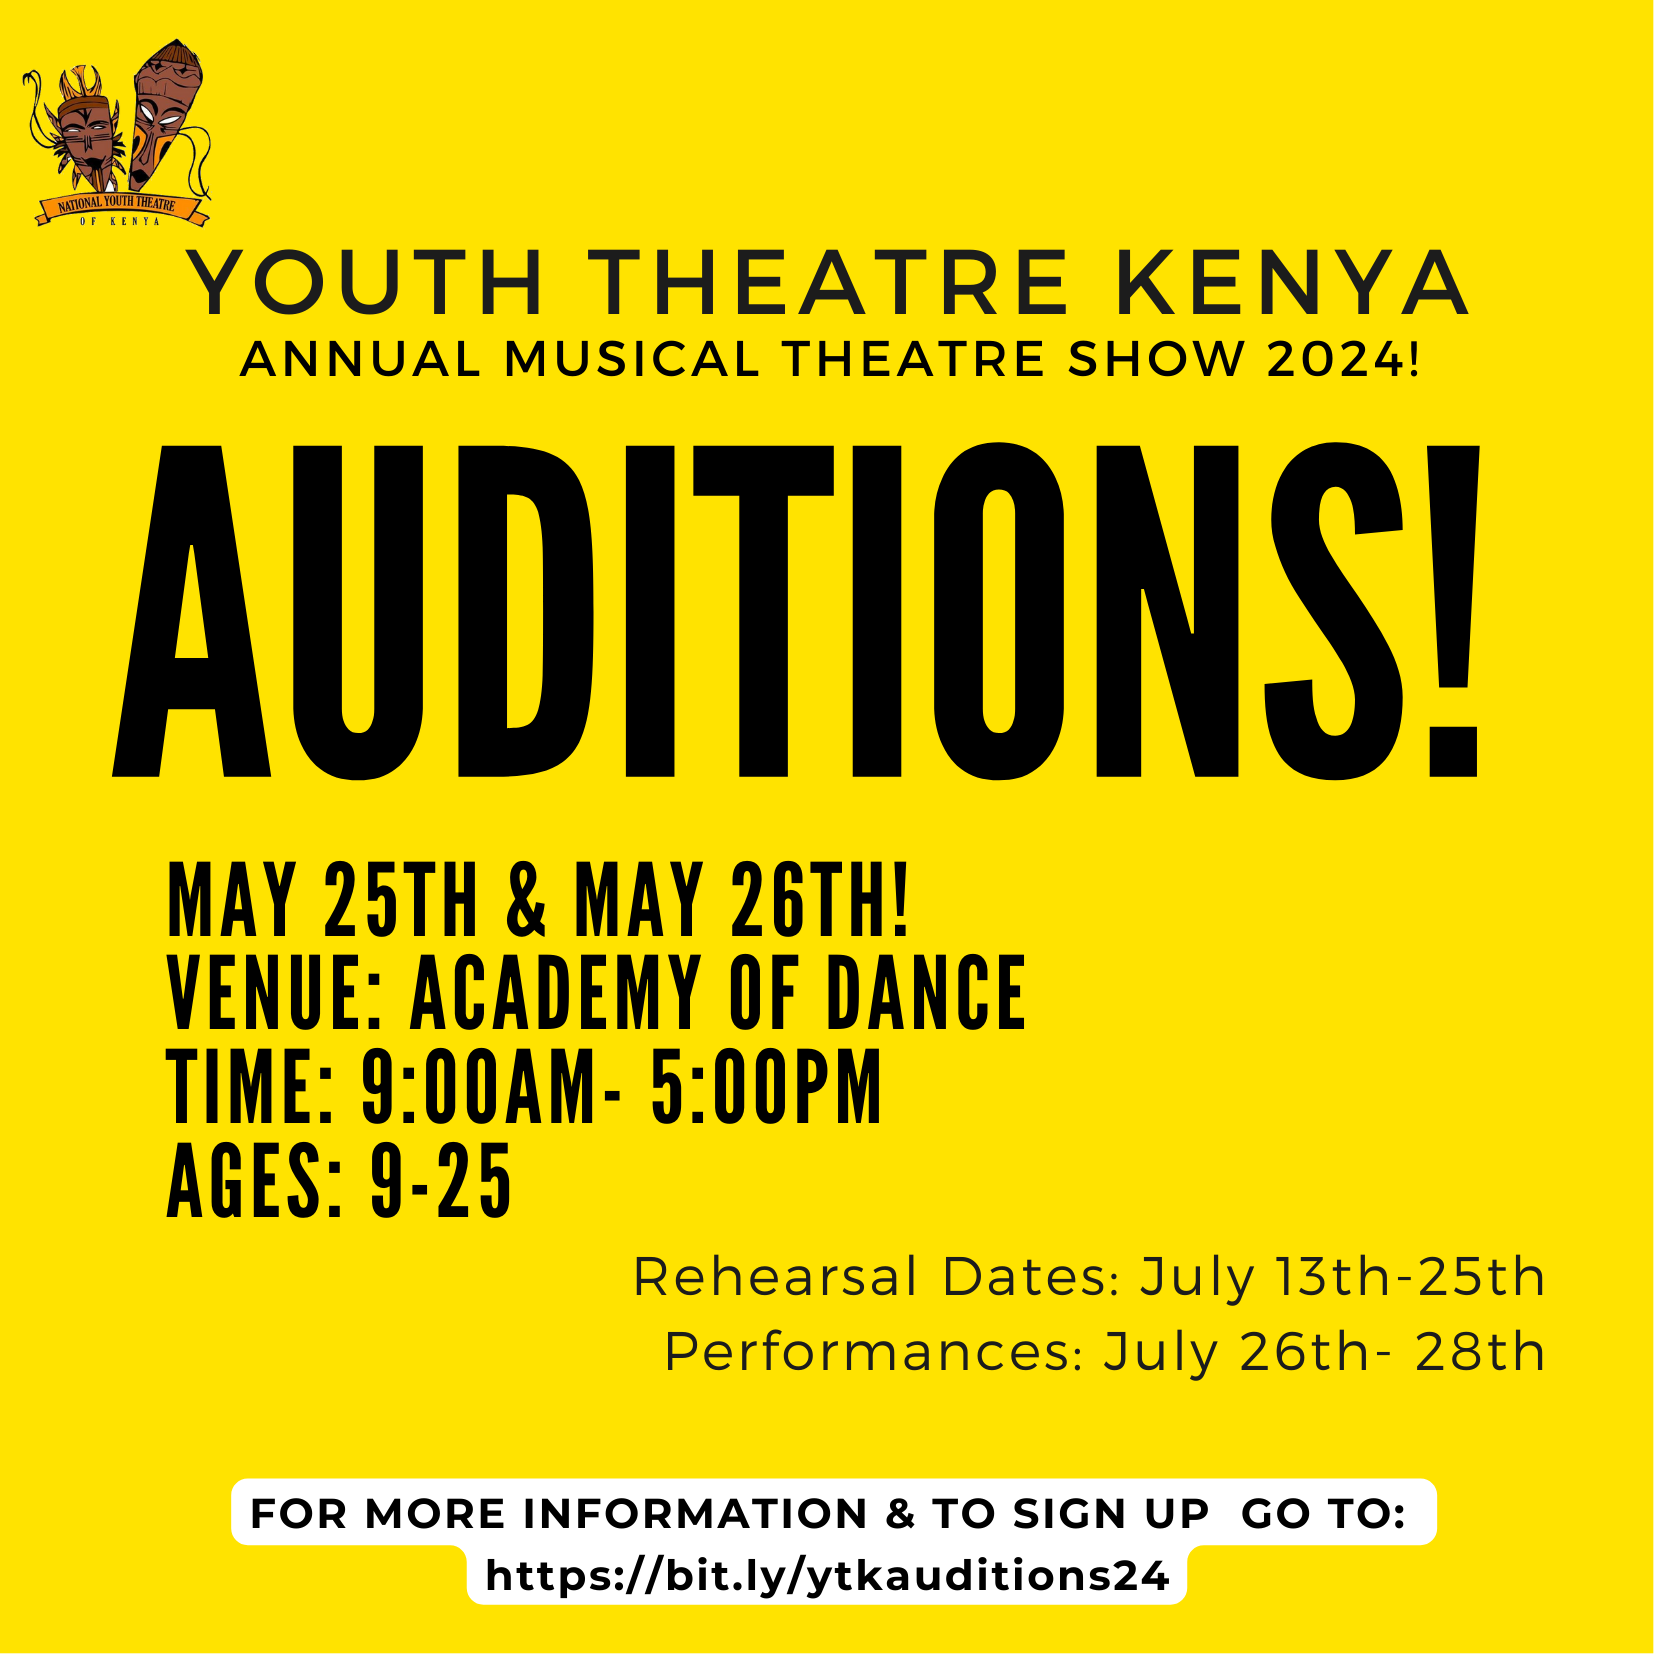 Youth Theatre Kenya Auditions